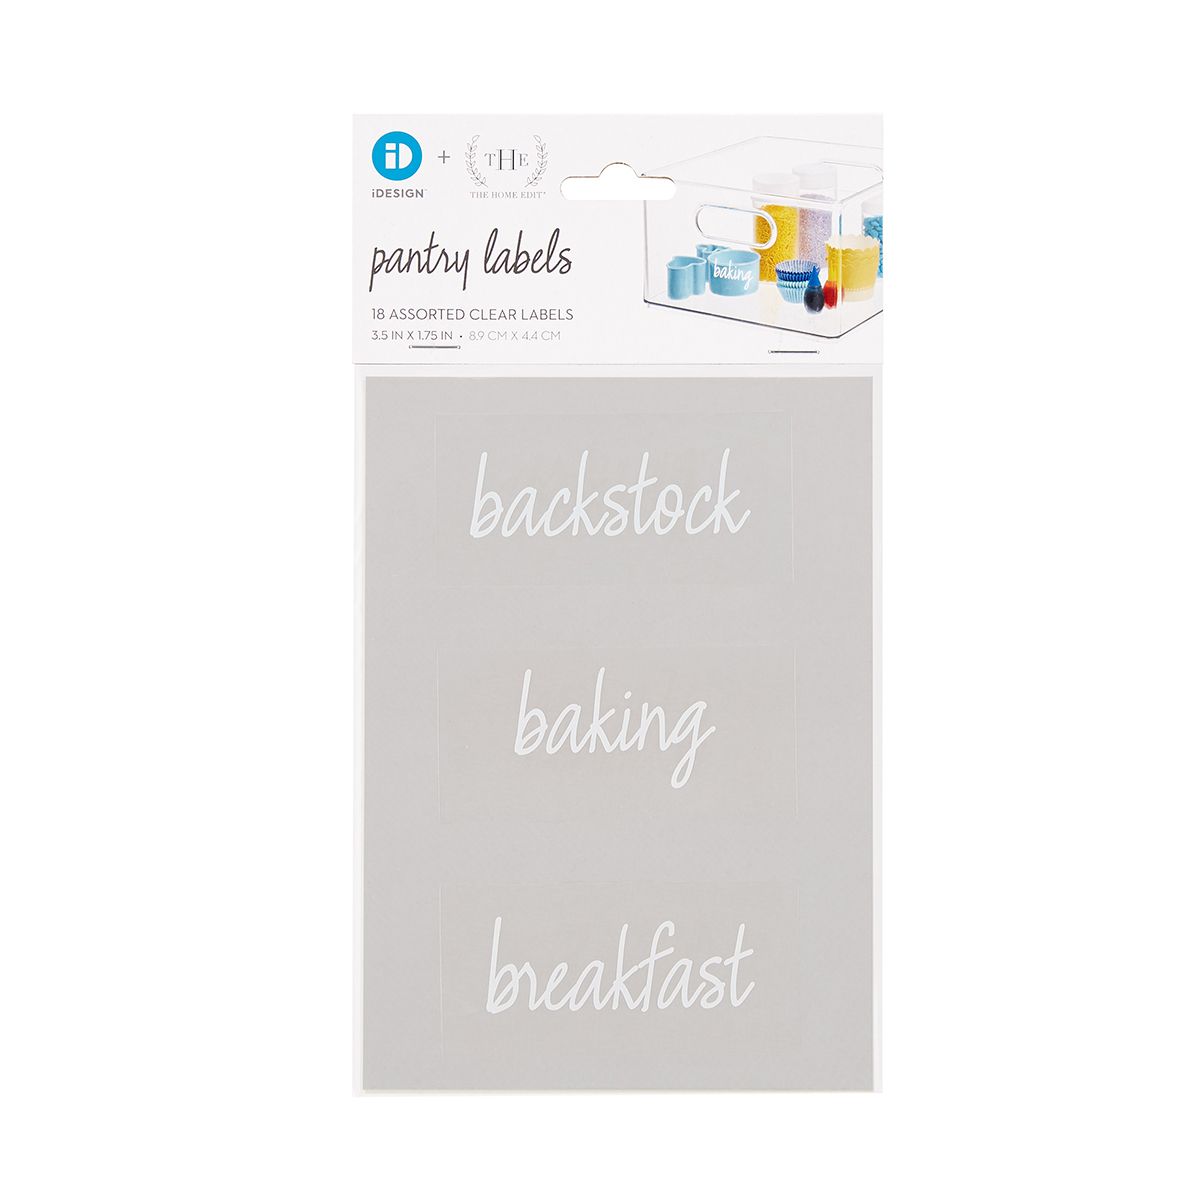 THE HOME EDIT Pantry Labels Pkg/18 | The Container Store